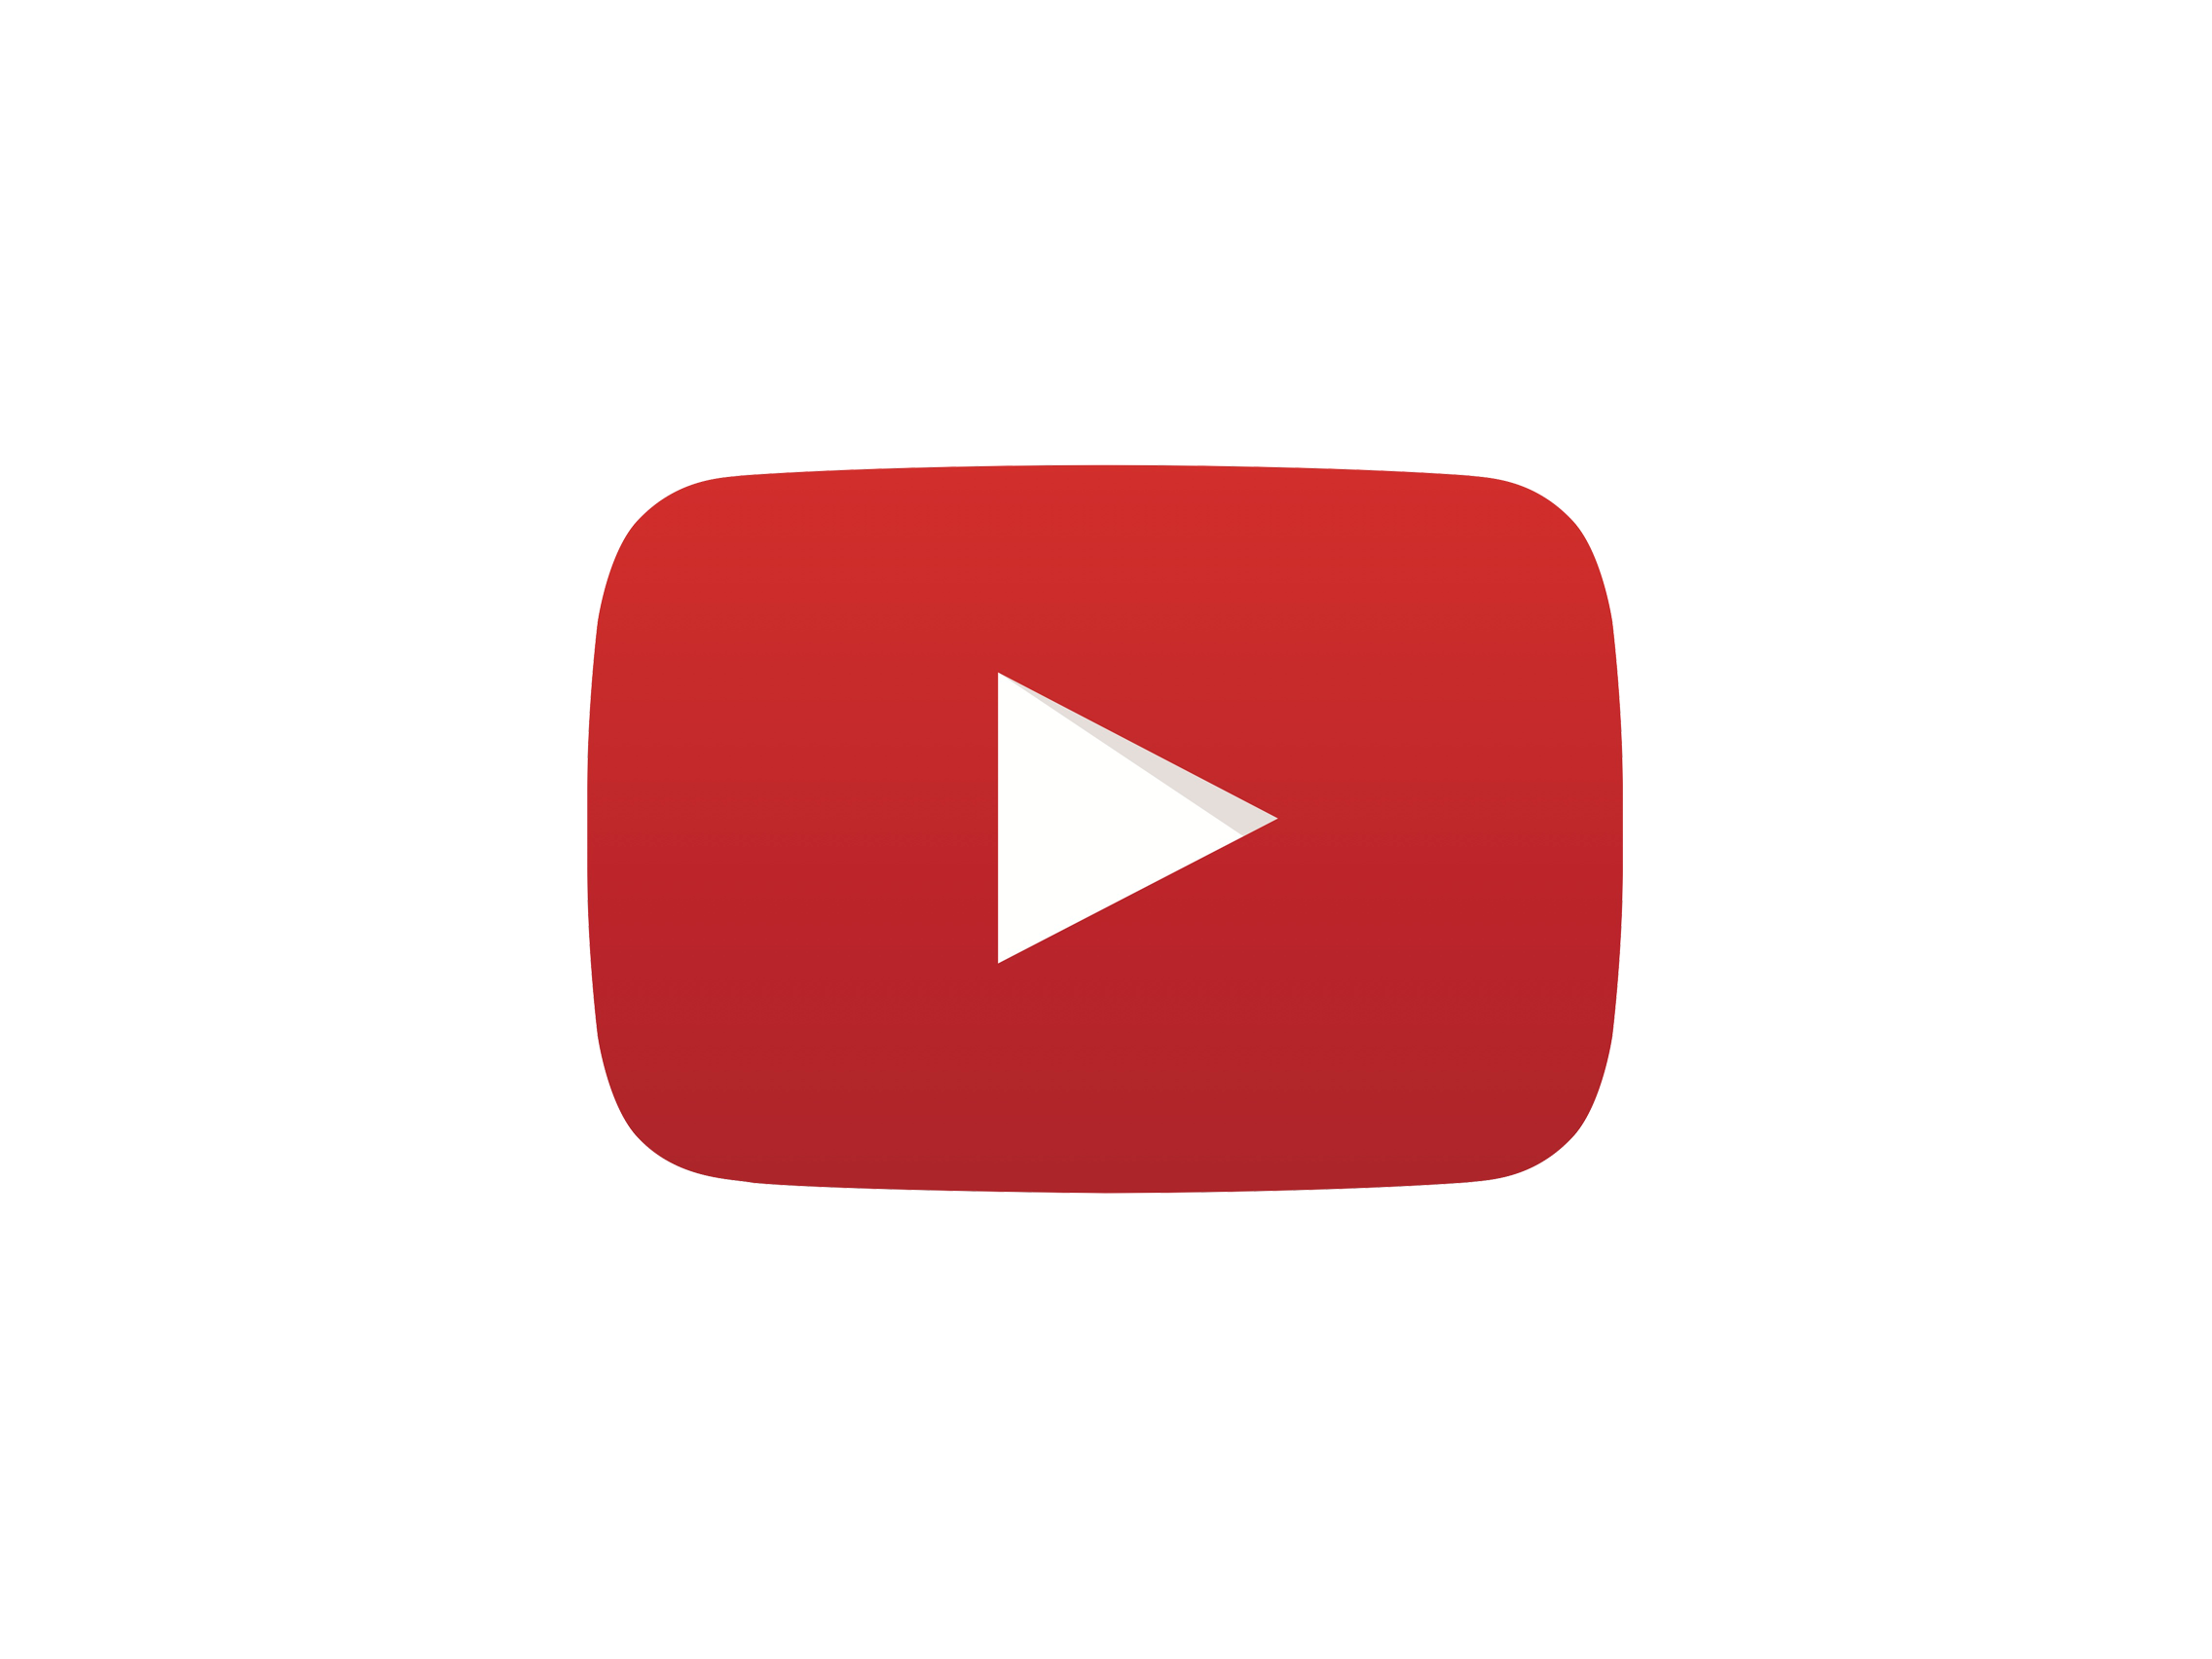 YouTube Icon - free download, PNG and vector